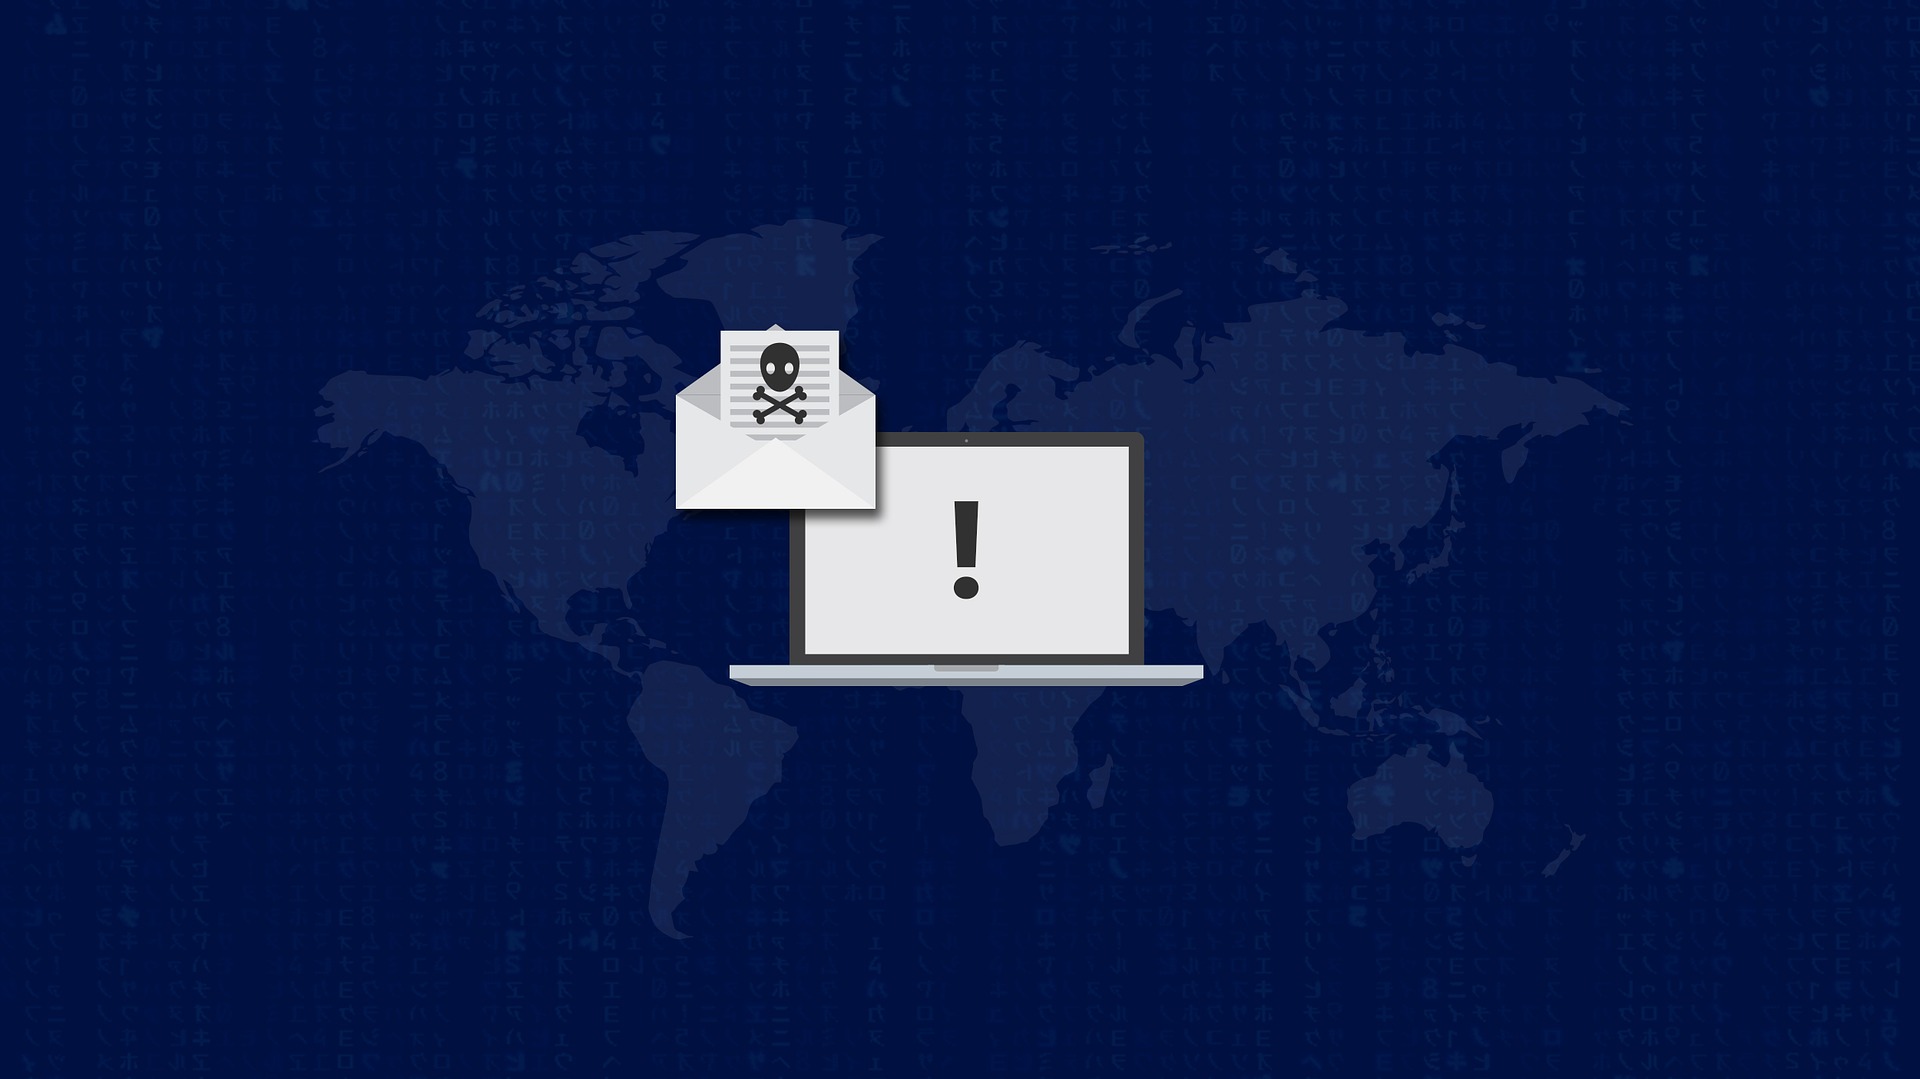 Average Ransomware Payment Significantly Increases Risk